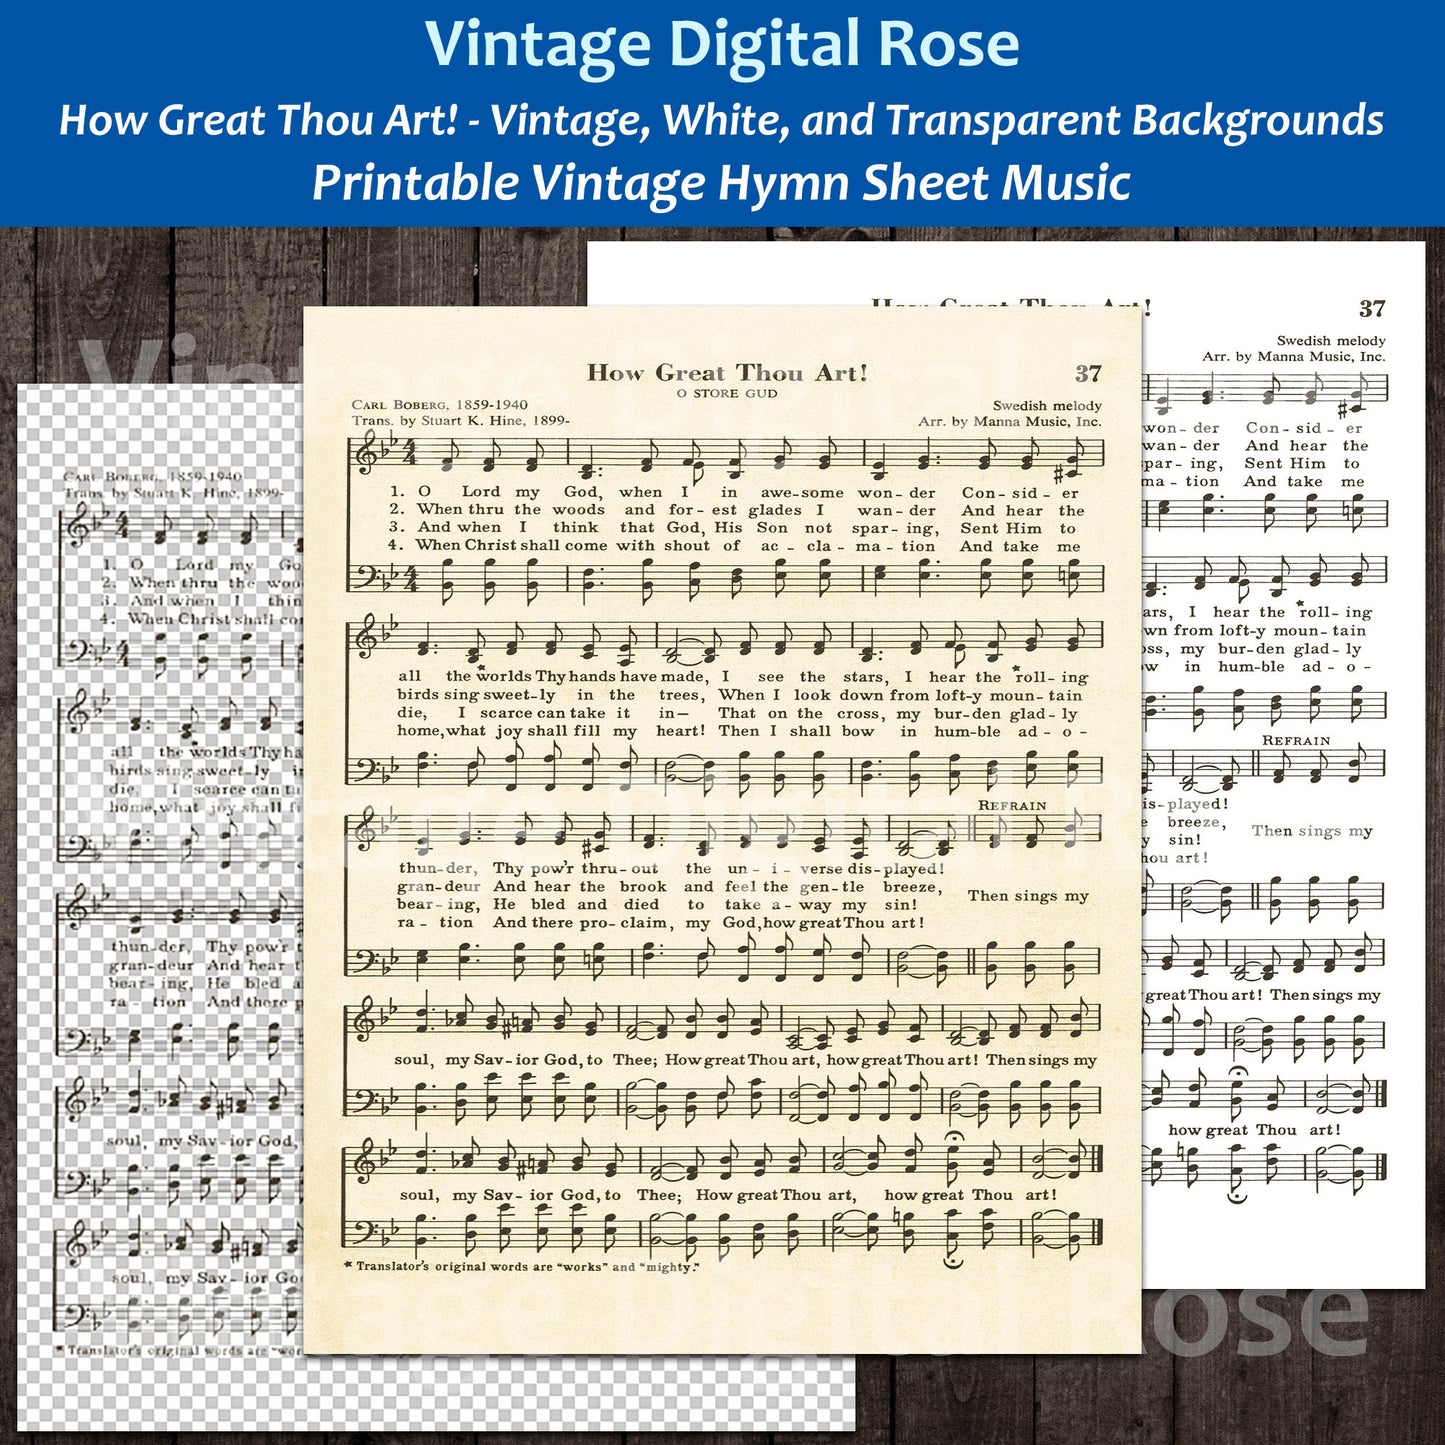 How Great Thou Art Printable Vintage Hymn Sheet Music - Vintage, White, and Transparent Backgrounds JPG PNG Files